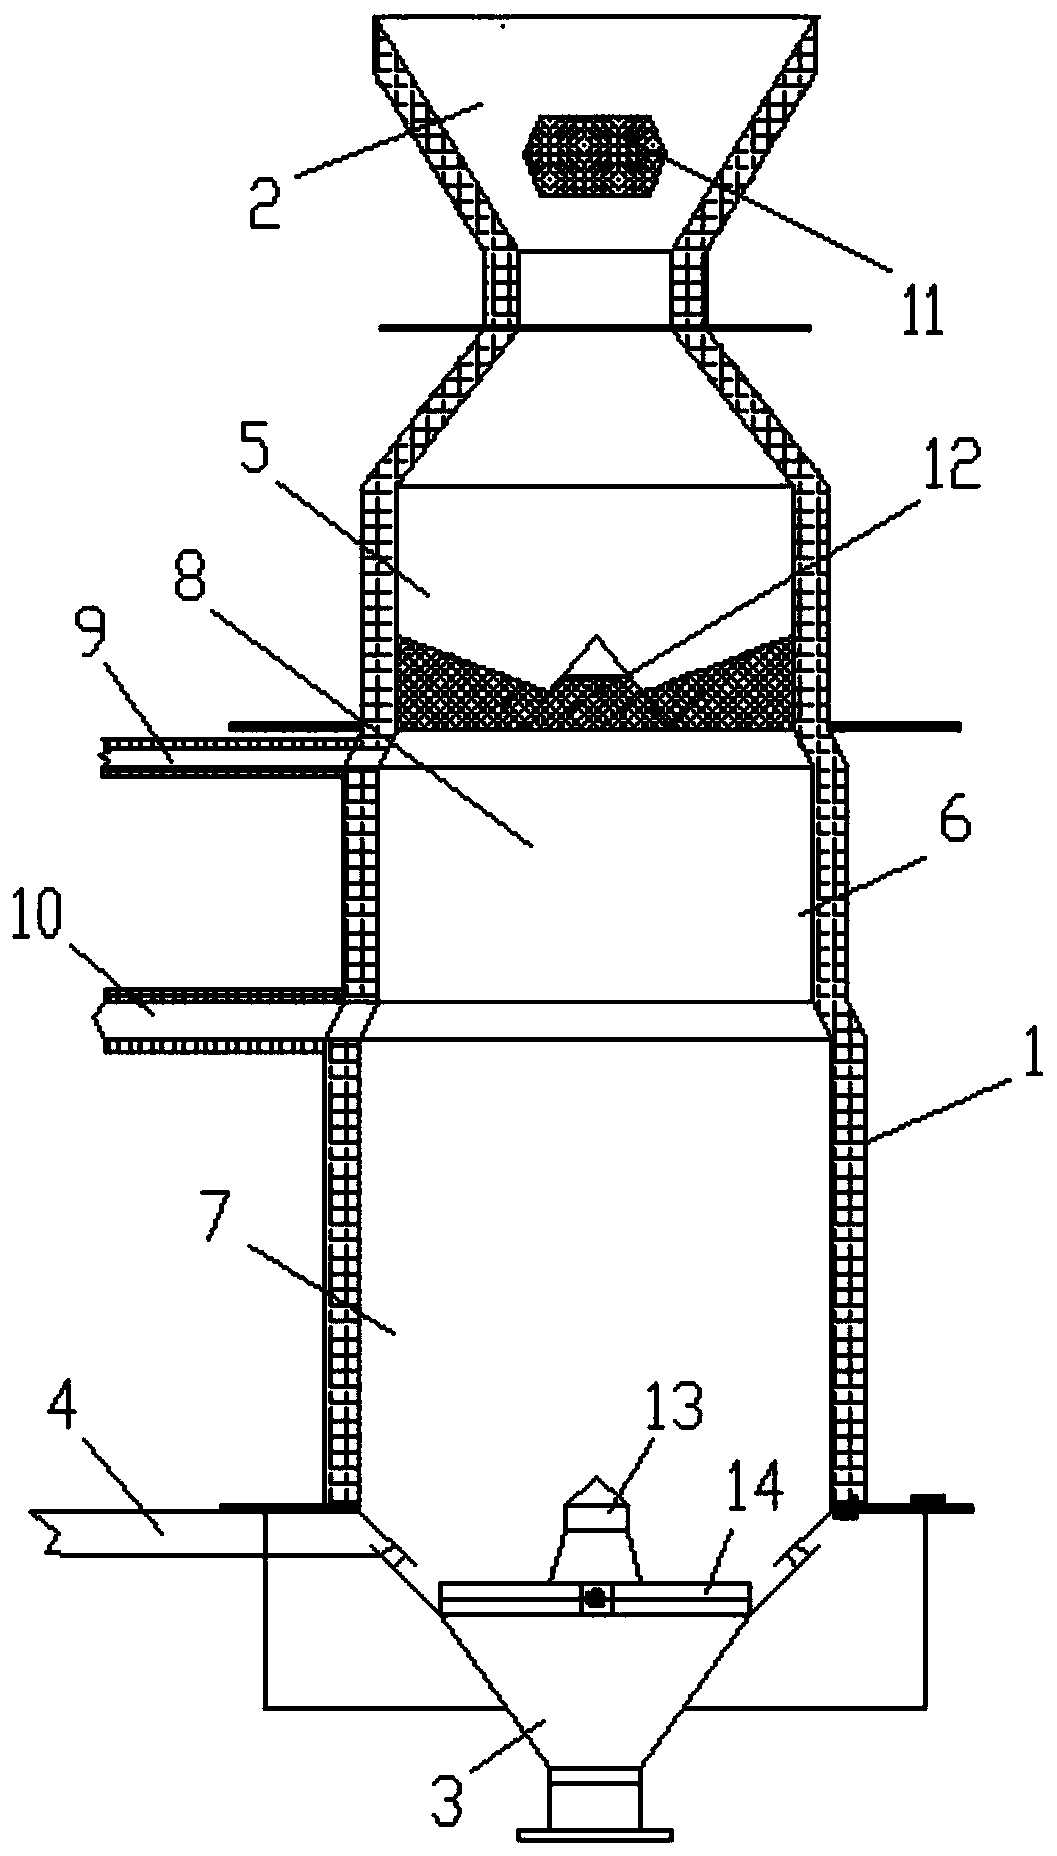 Method for recovering lead slag and utilizing waste heat in process of lead smelting